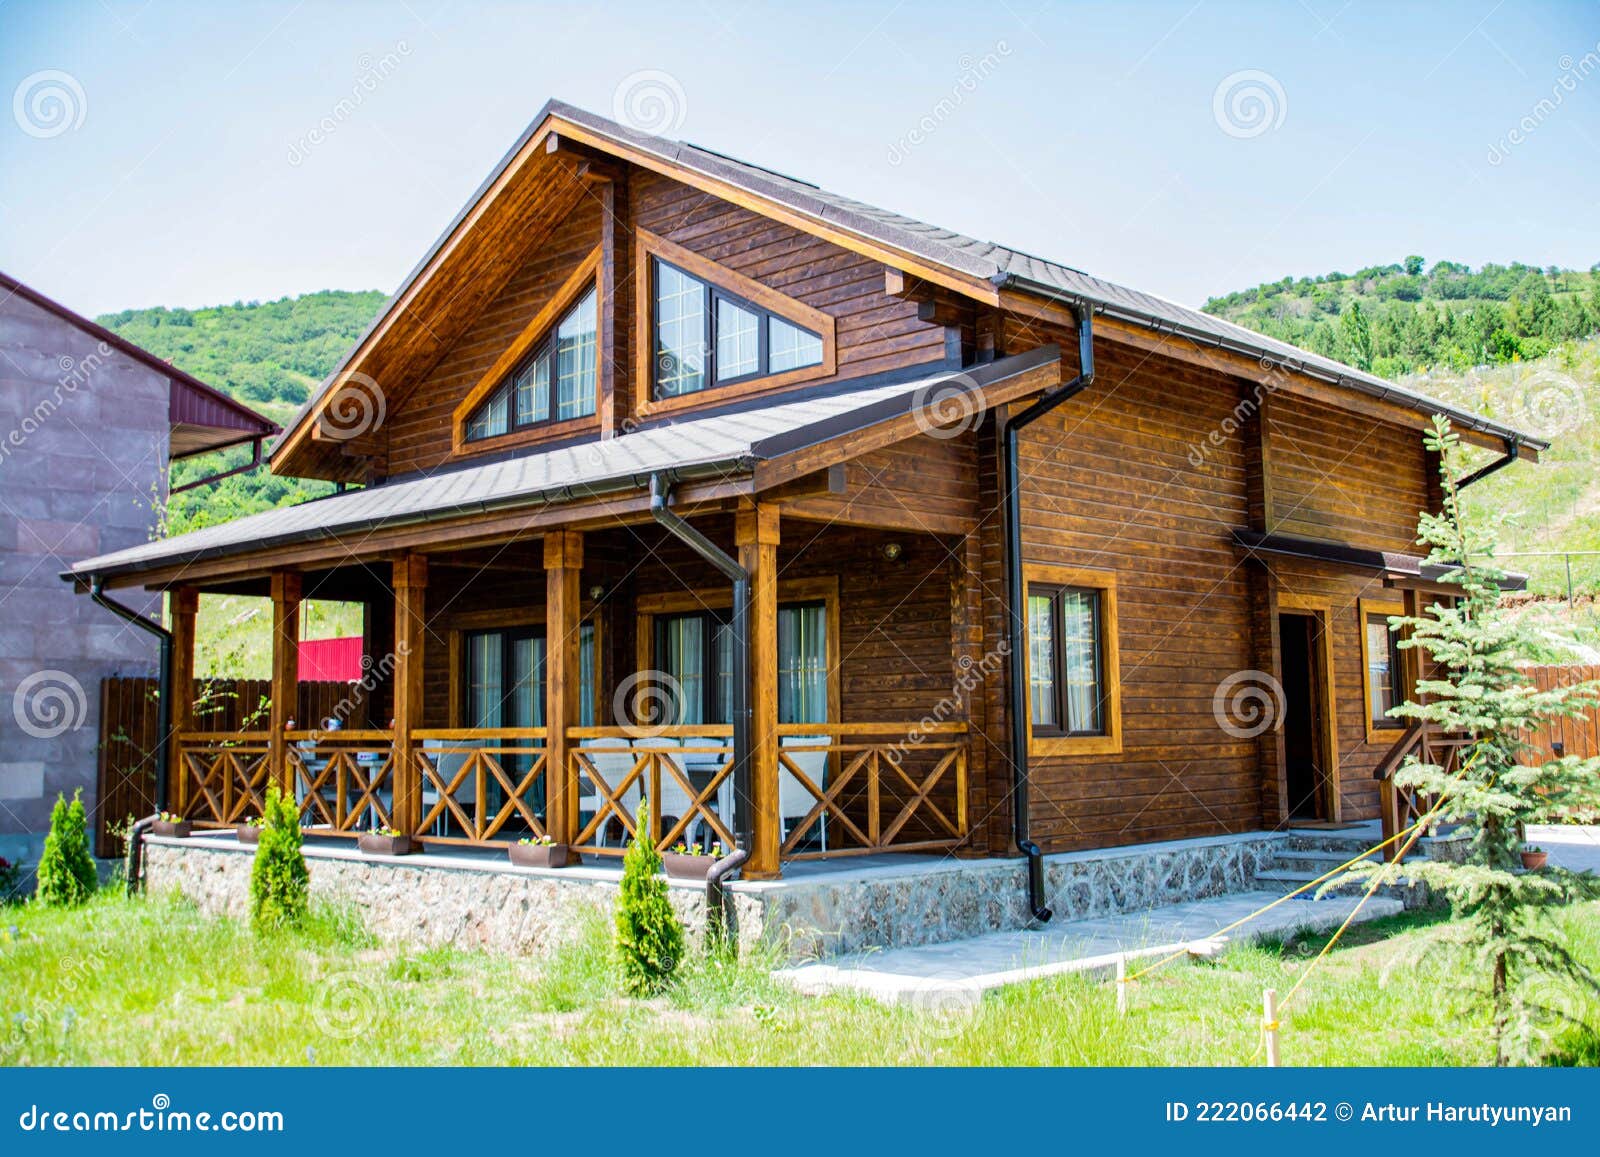 Wooden House. Beautiful House Made of Wood Stock Photo - Image of ...